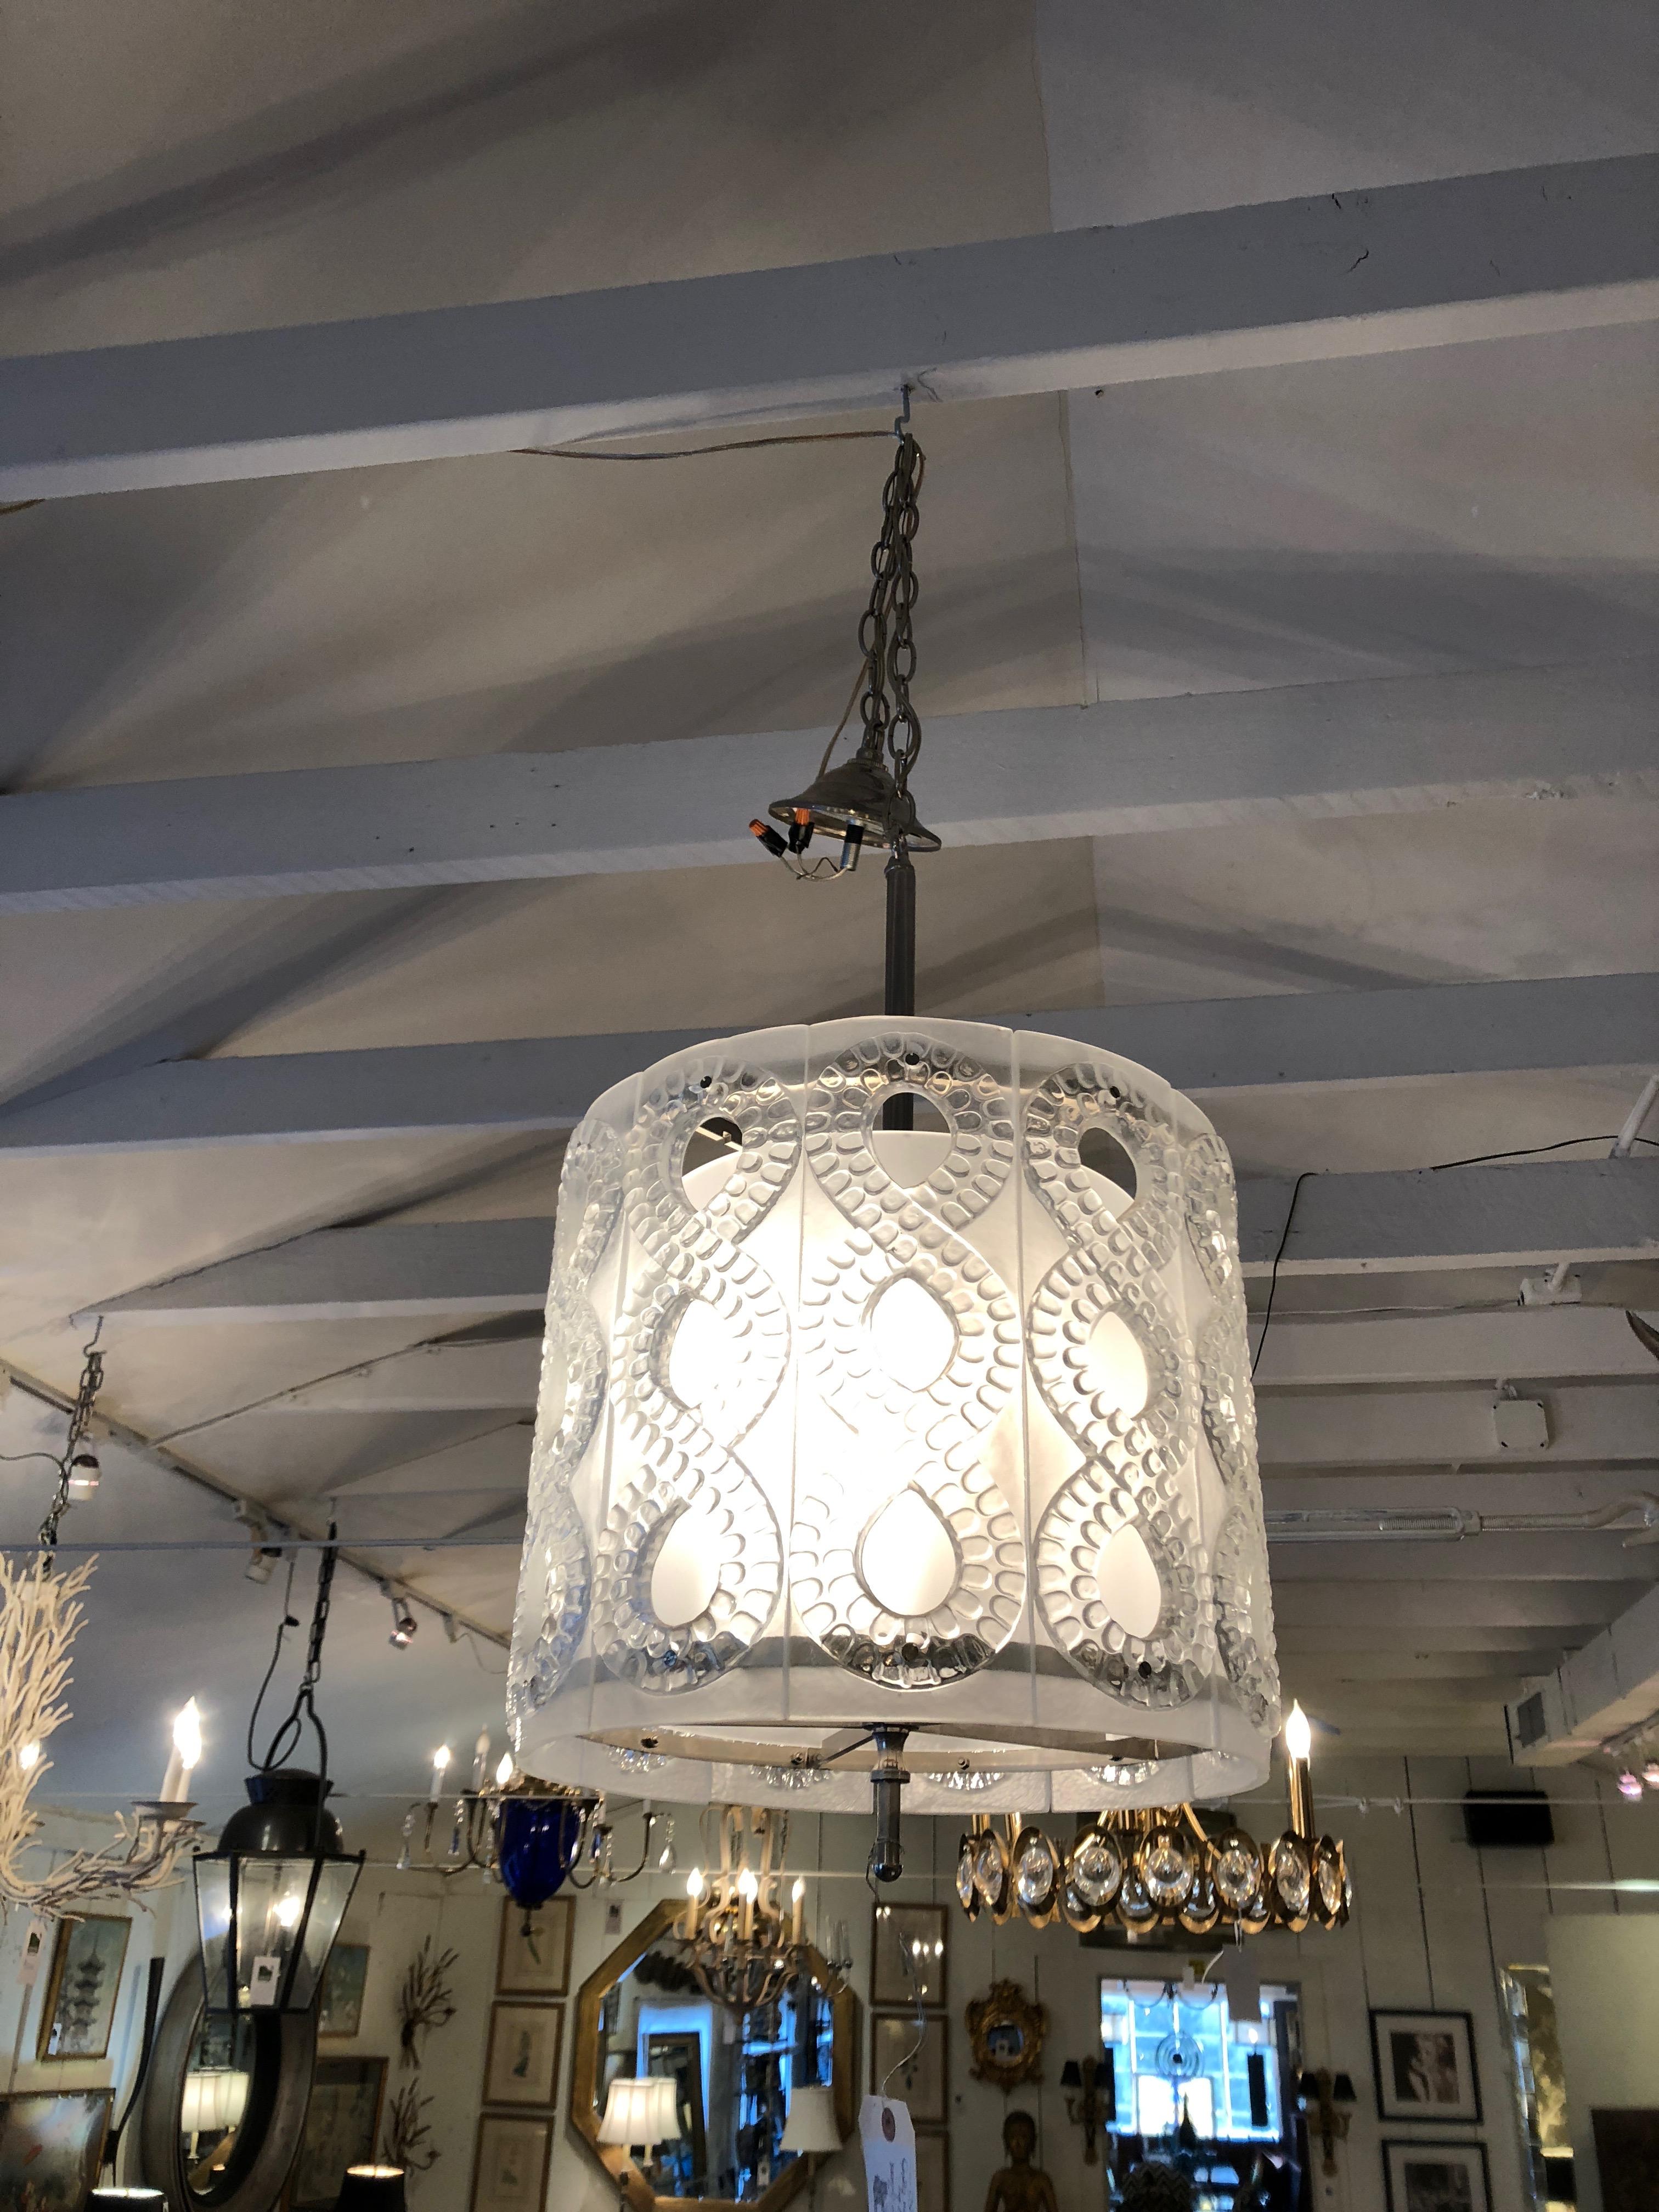 Gorgeous contemporary light fixture having a 15 inch diameter cylindrical shape with chunky frosted glass panels decorated with figure 8s of patterned glass, all encasing a second layer of interior glass. Nickel finial, bar and chain and ceiling